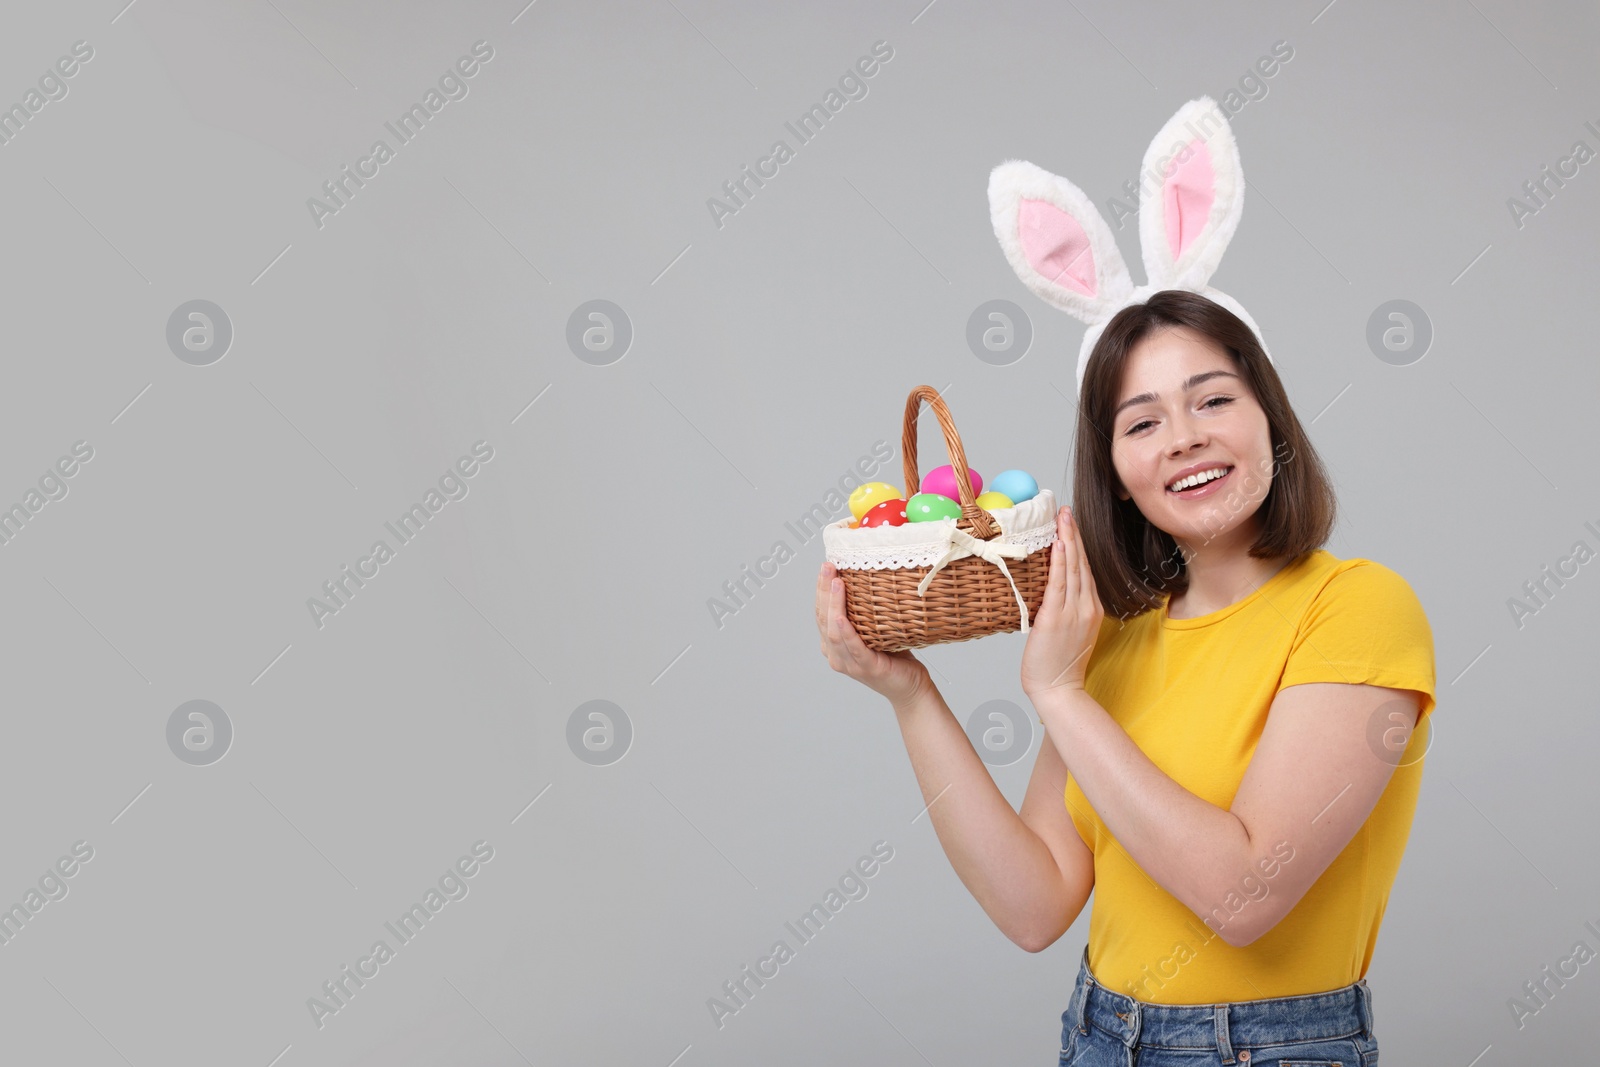 Photo of Easter celebration. Happy woman with bunny ears and wicker basket full of painted eggs on grey background, space for text